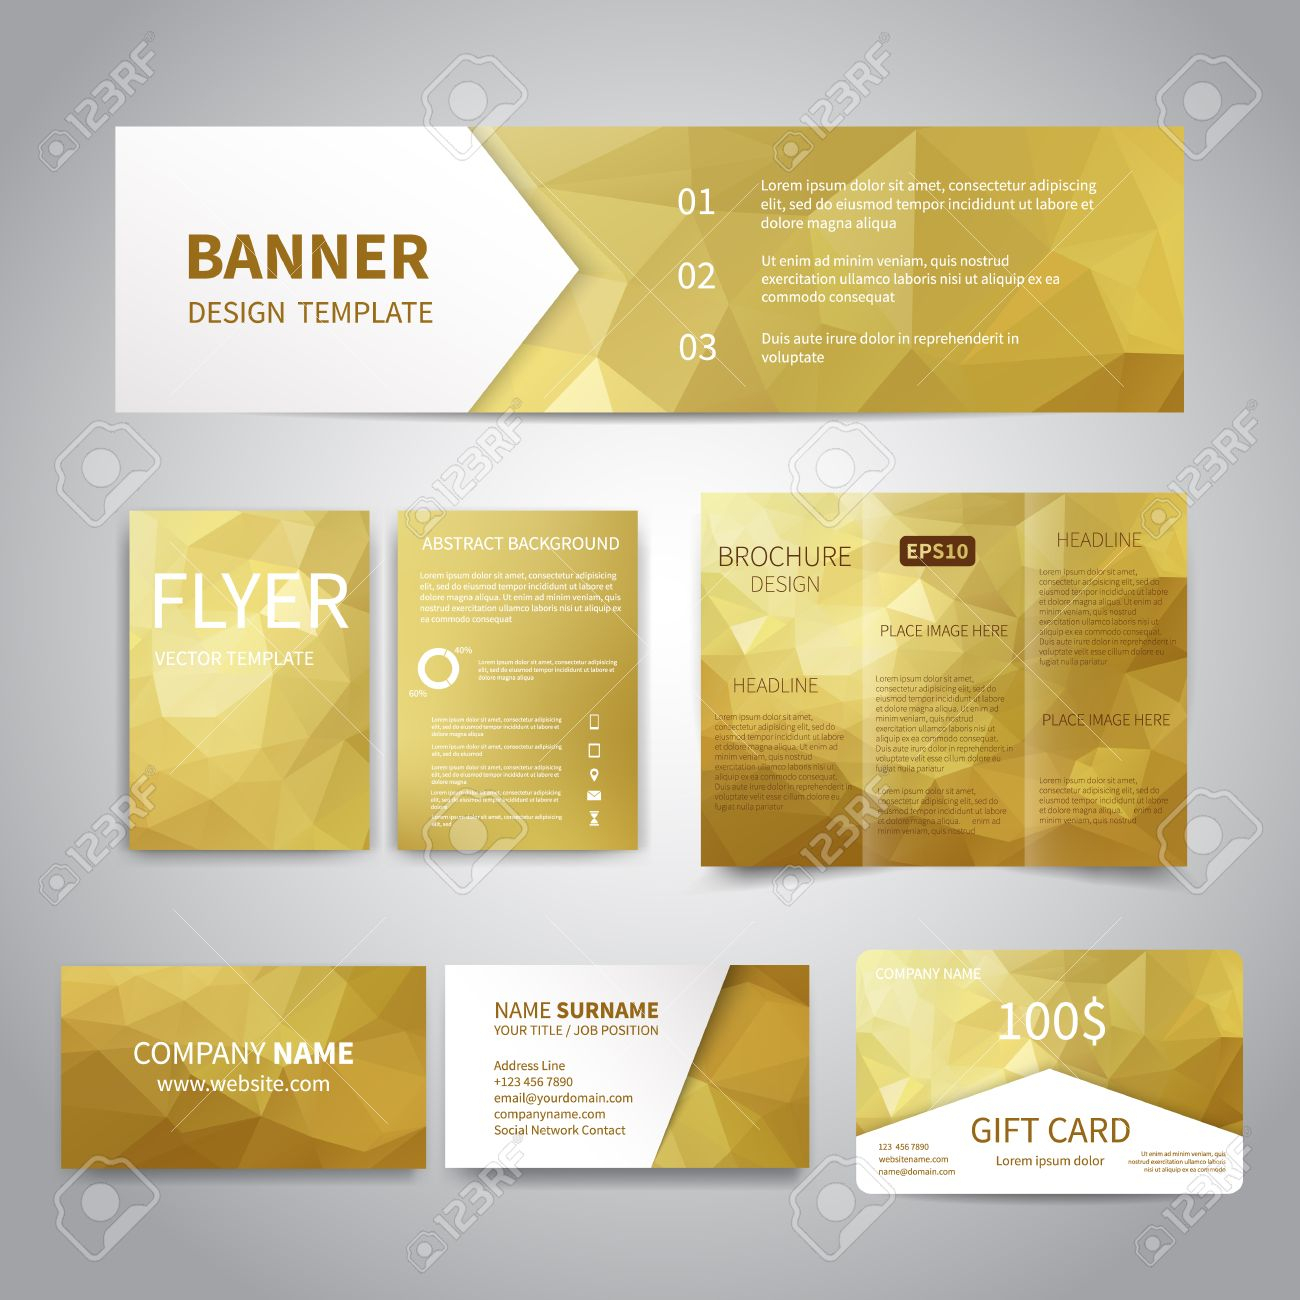 Banner, Flyers, Brochure, Business Cards, Gift Card Design Templates.. Throughout Advertising Cards Templates